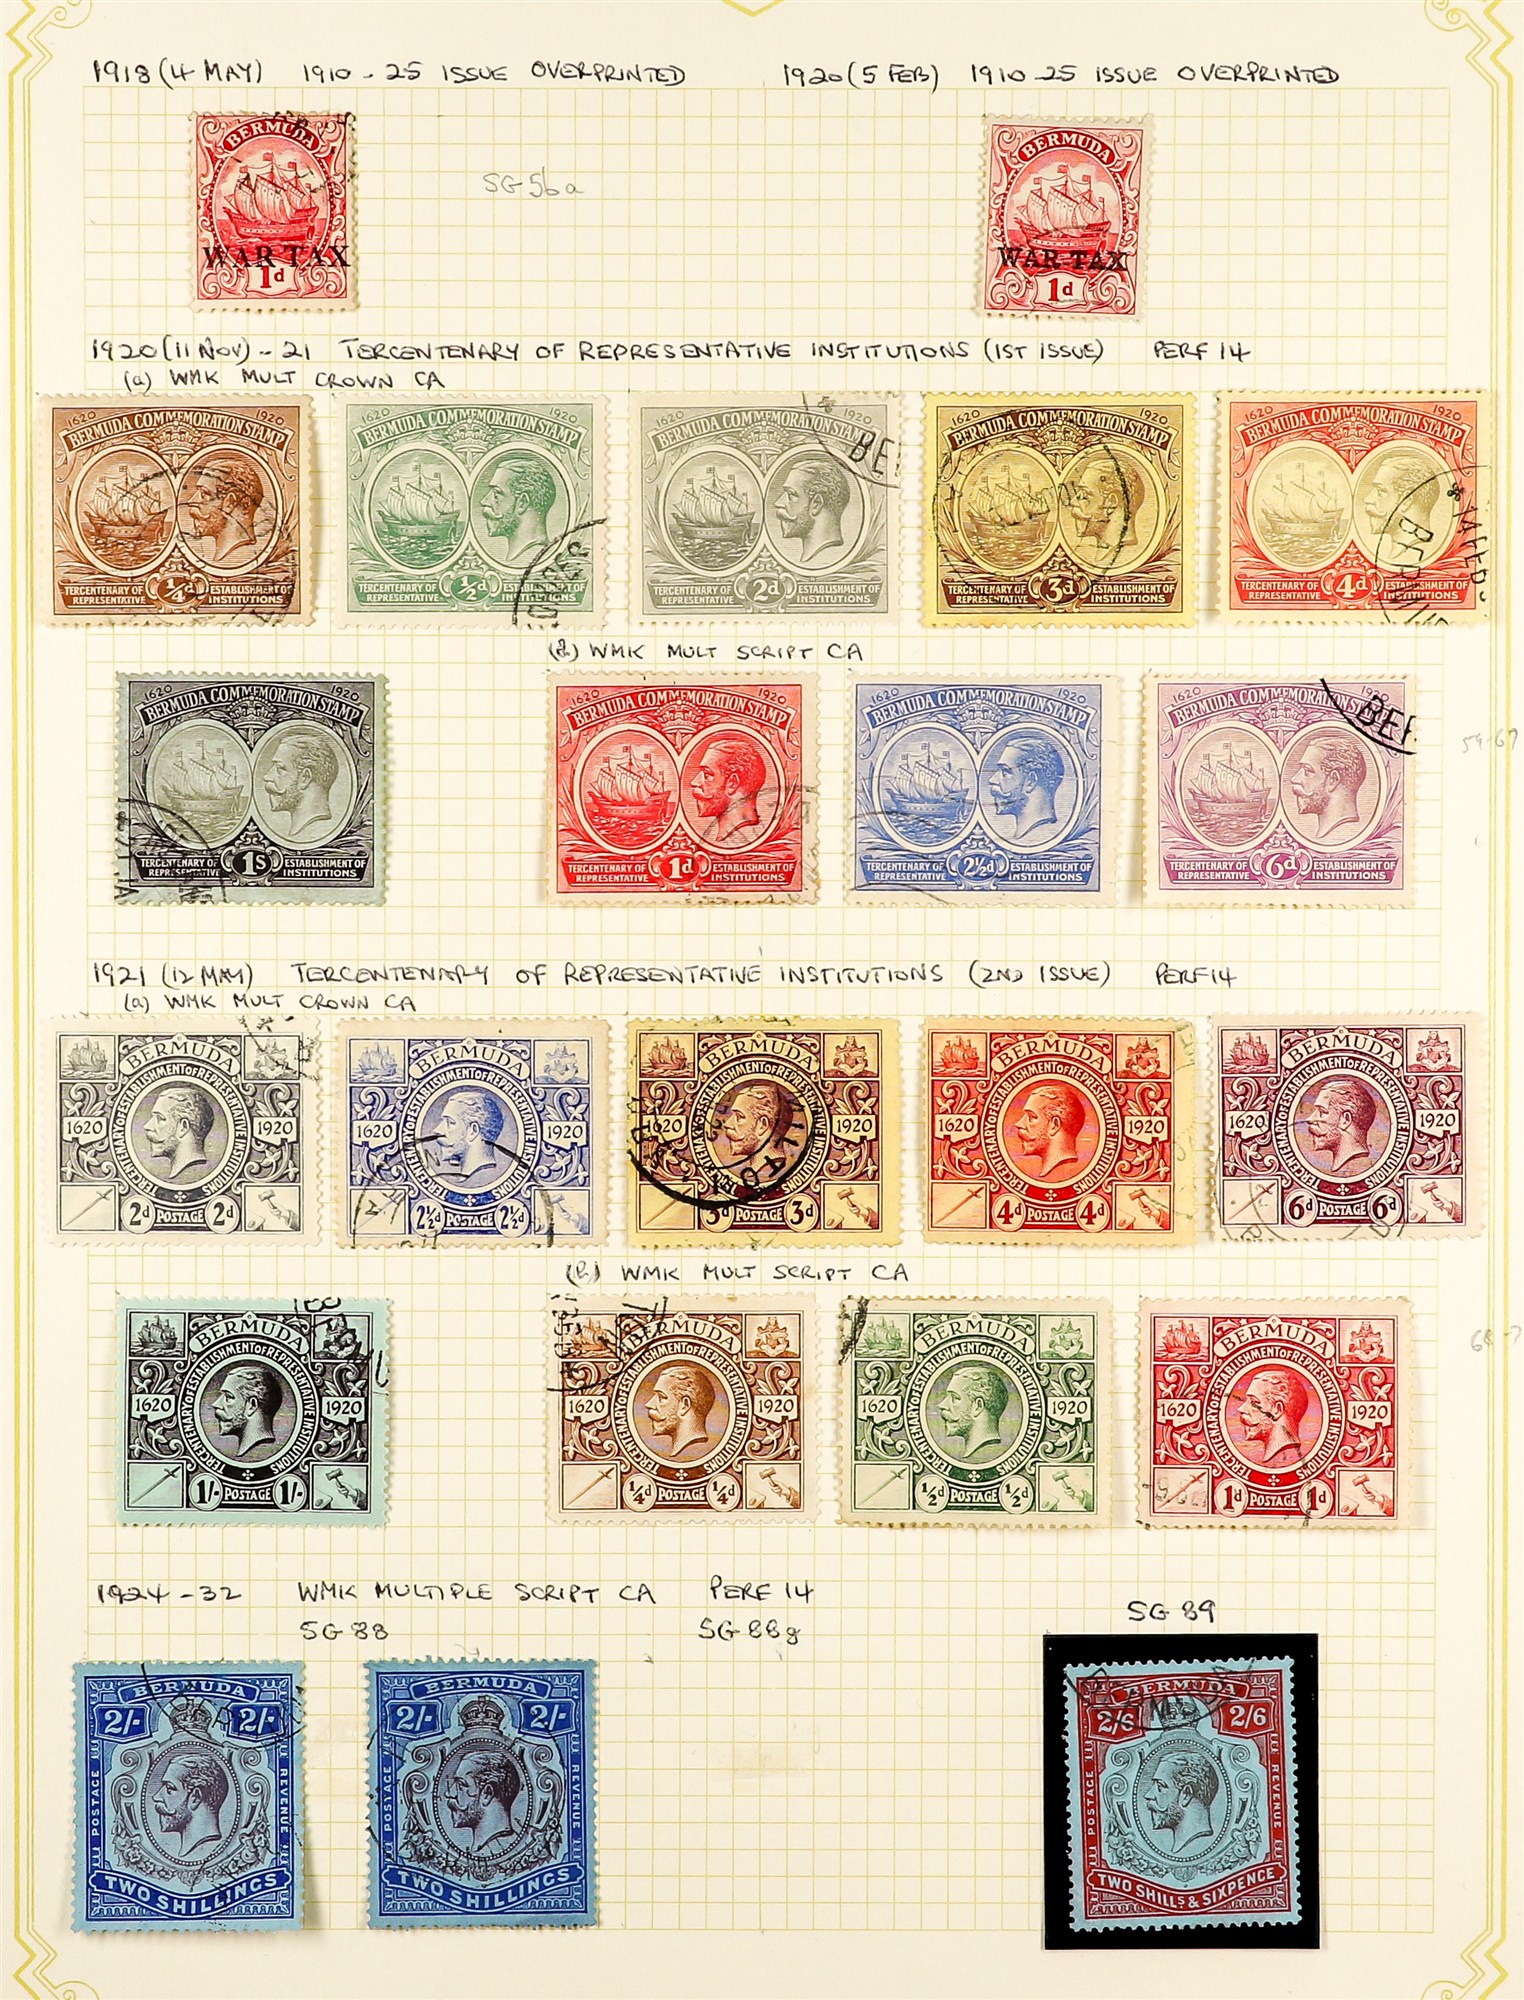 BERMUDA 1902 - 1936 FINE USED COLLECTION of 87 stamps on pages, note 1906-10 set, 1910-25 set with - Image 2 of 3